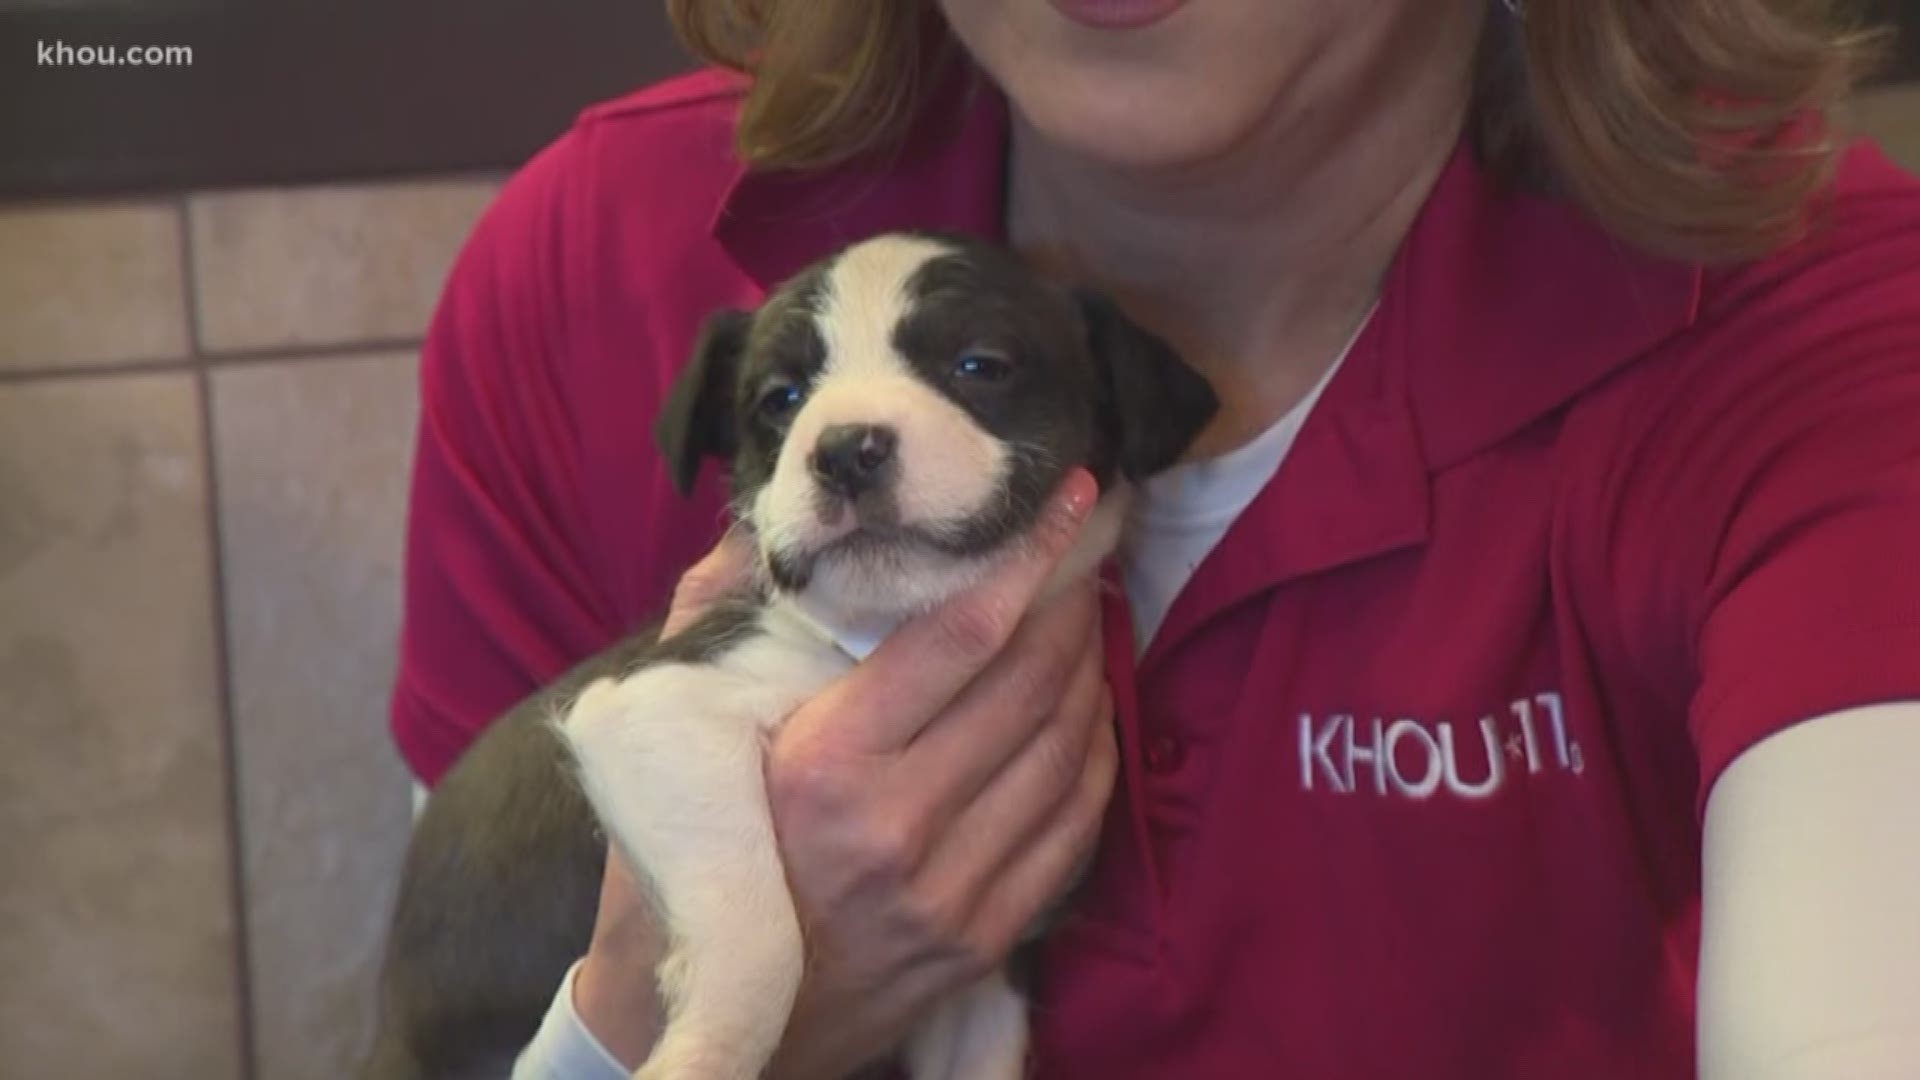 Open up your hearts and homes to animals in need on Friday at the Harris County Animal Shelter. KHOU is teaming up with the shelter for a special adopt event.